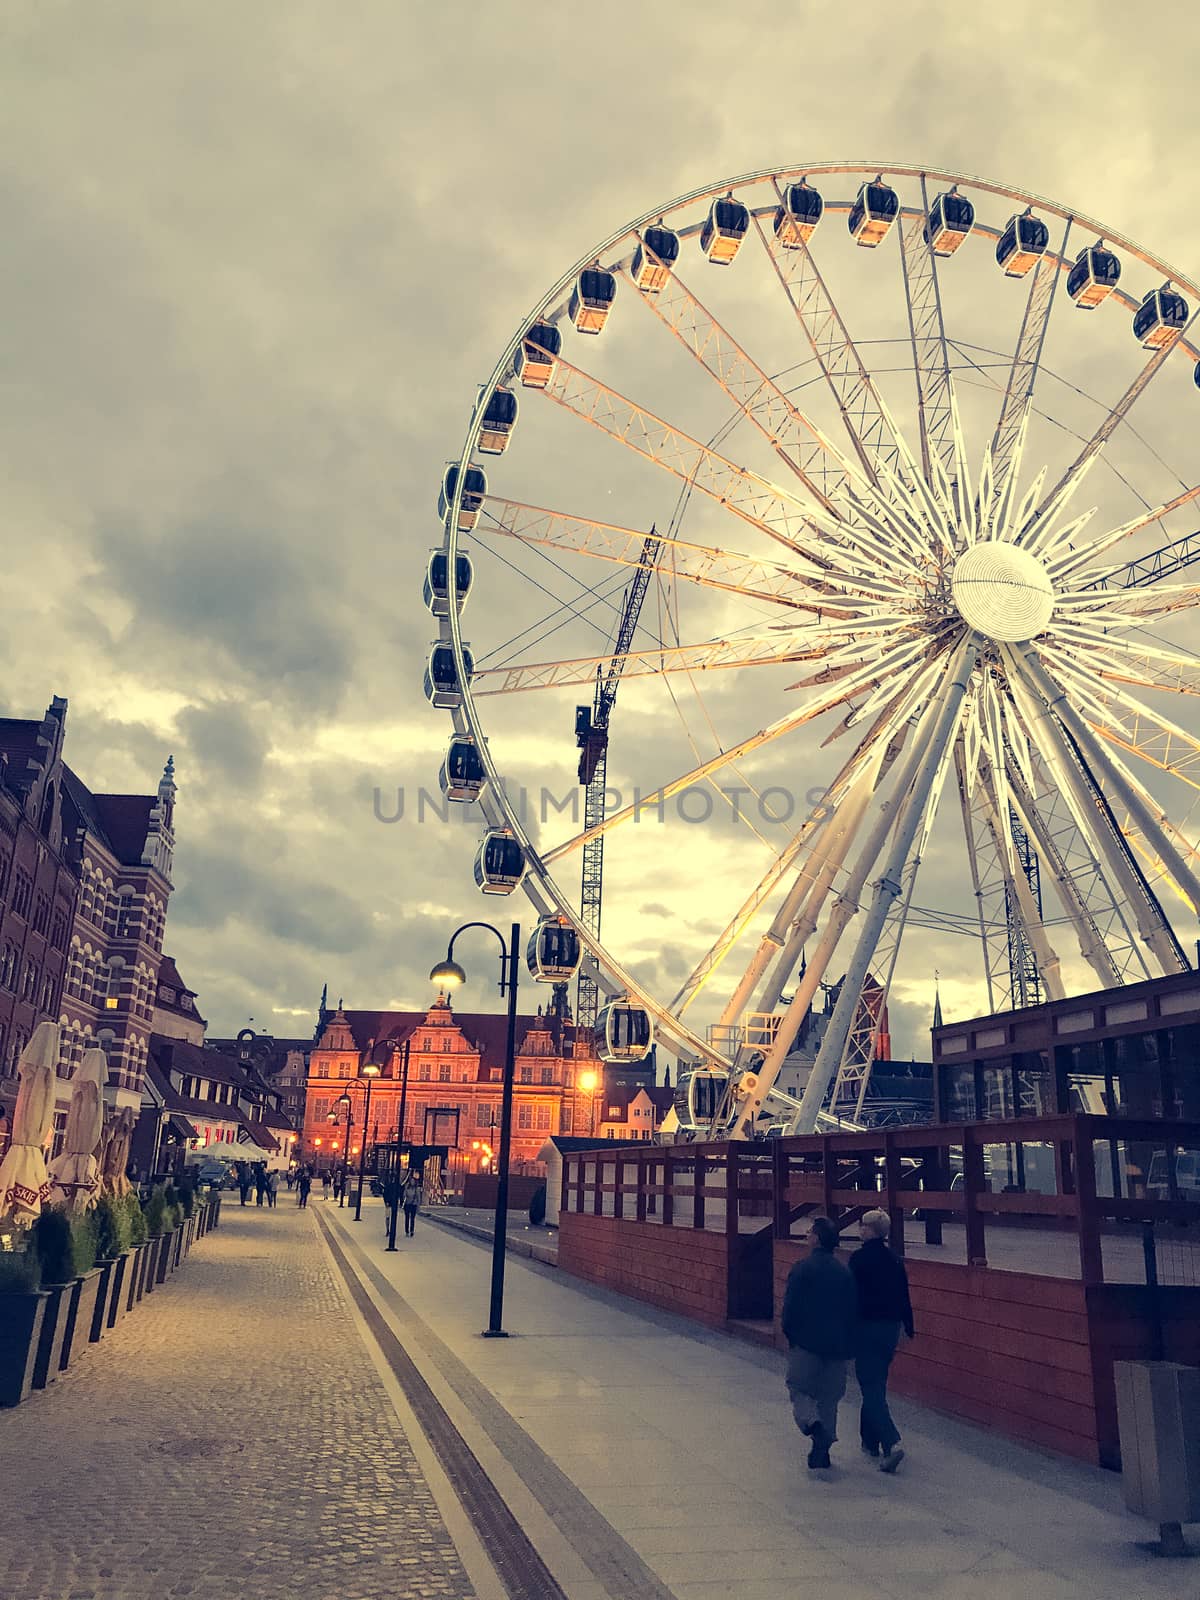 Great evening Ferris wheel in Gdansk, Poland against the background of old cityscape